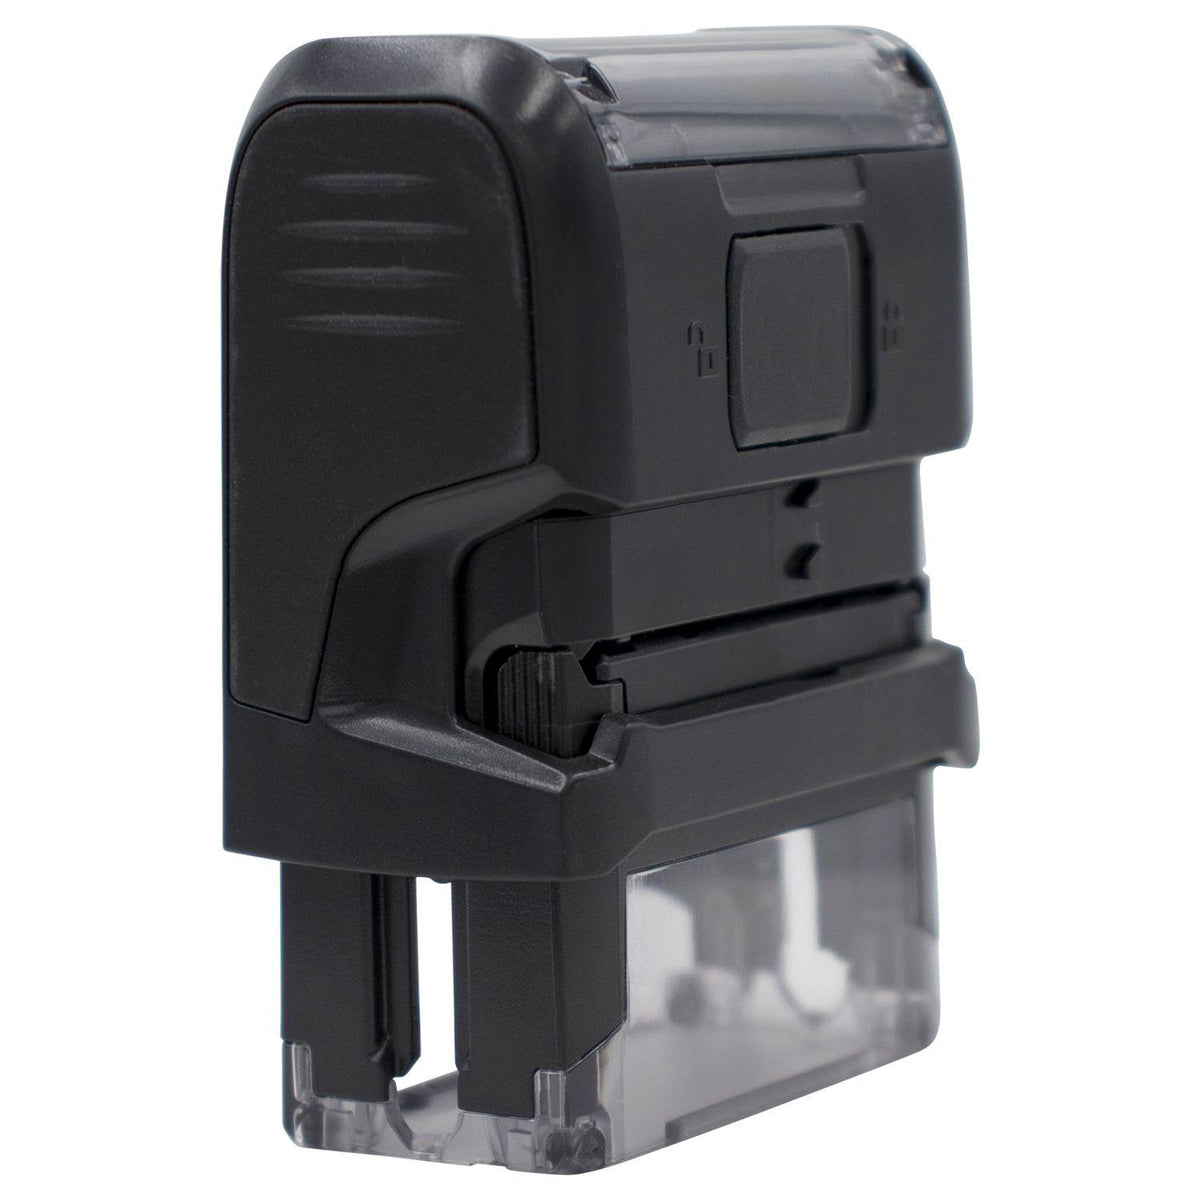 Large Self-Inking Received Without Contents Stamp - Engineer Seal Stamps - Brand_Trodat, Impression Size_Large, Stamp Type_Self-Inking Stamp, Type of Use_Postal &amp; Mailing, Type of Use_Shipping &amp; Receiving